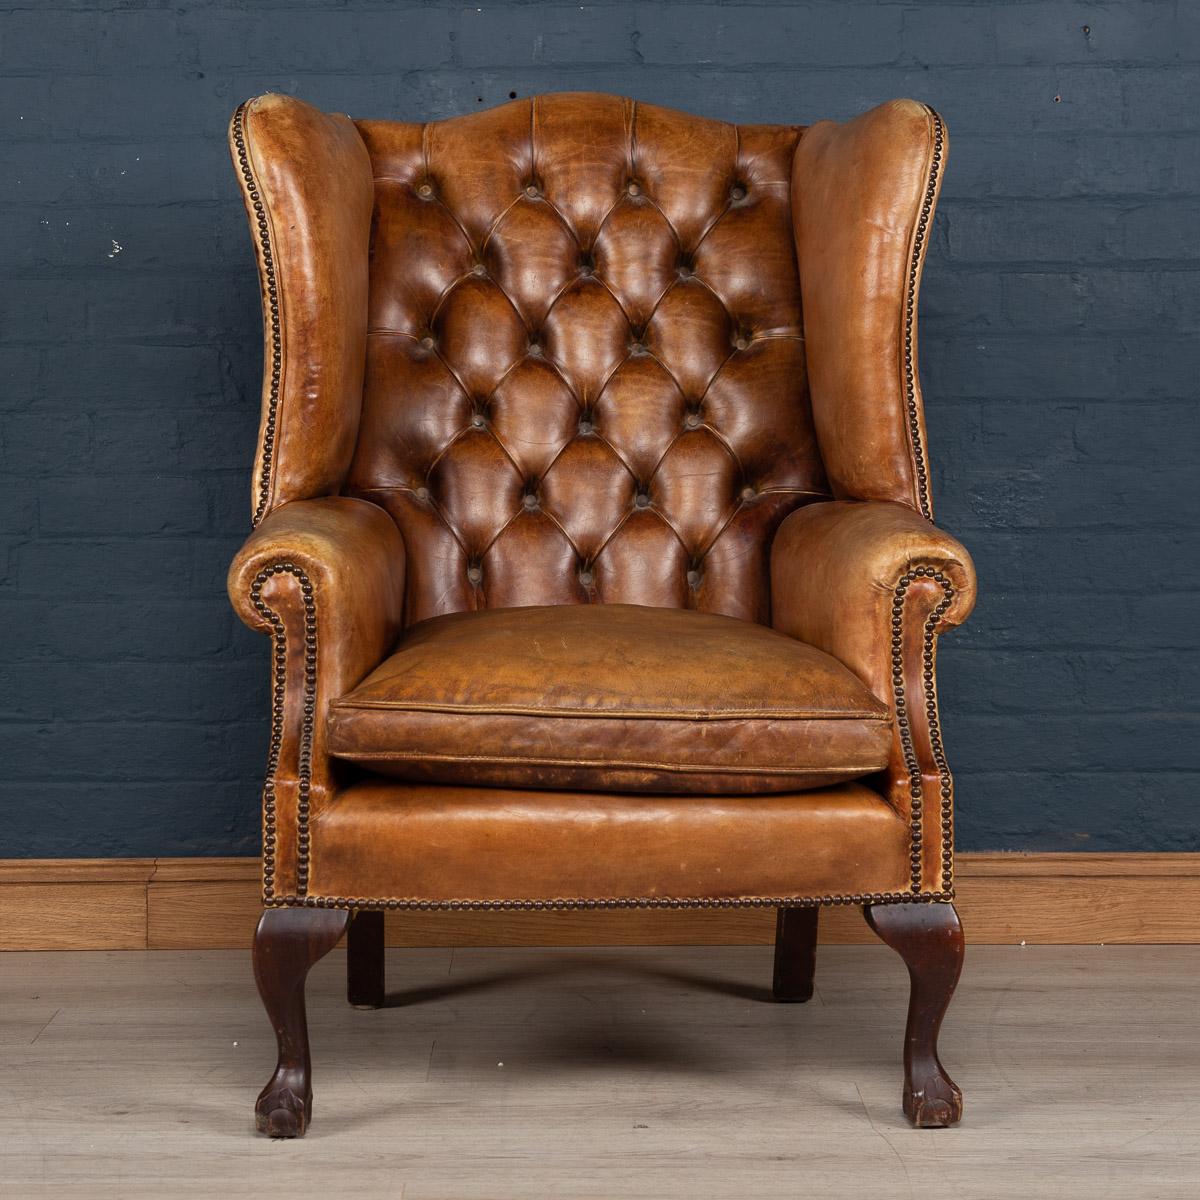 A lovely English wing back leather chair with button down backrest from the middle of the last century. Great patina and color.

Please note that our interior pieces are located at our Interior Design Showroom in Northamptonshire.
  